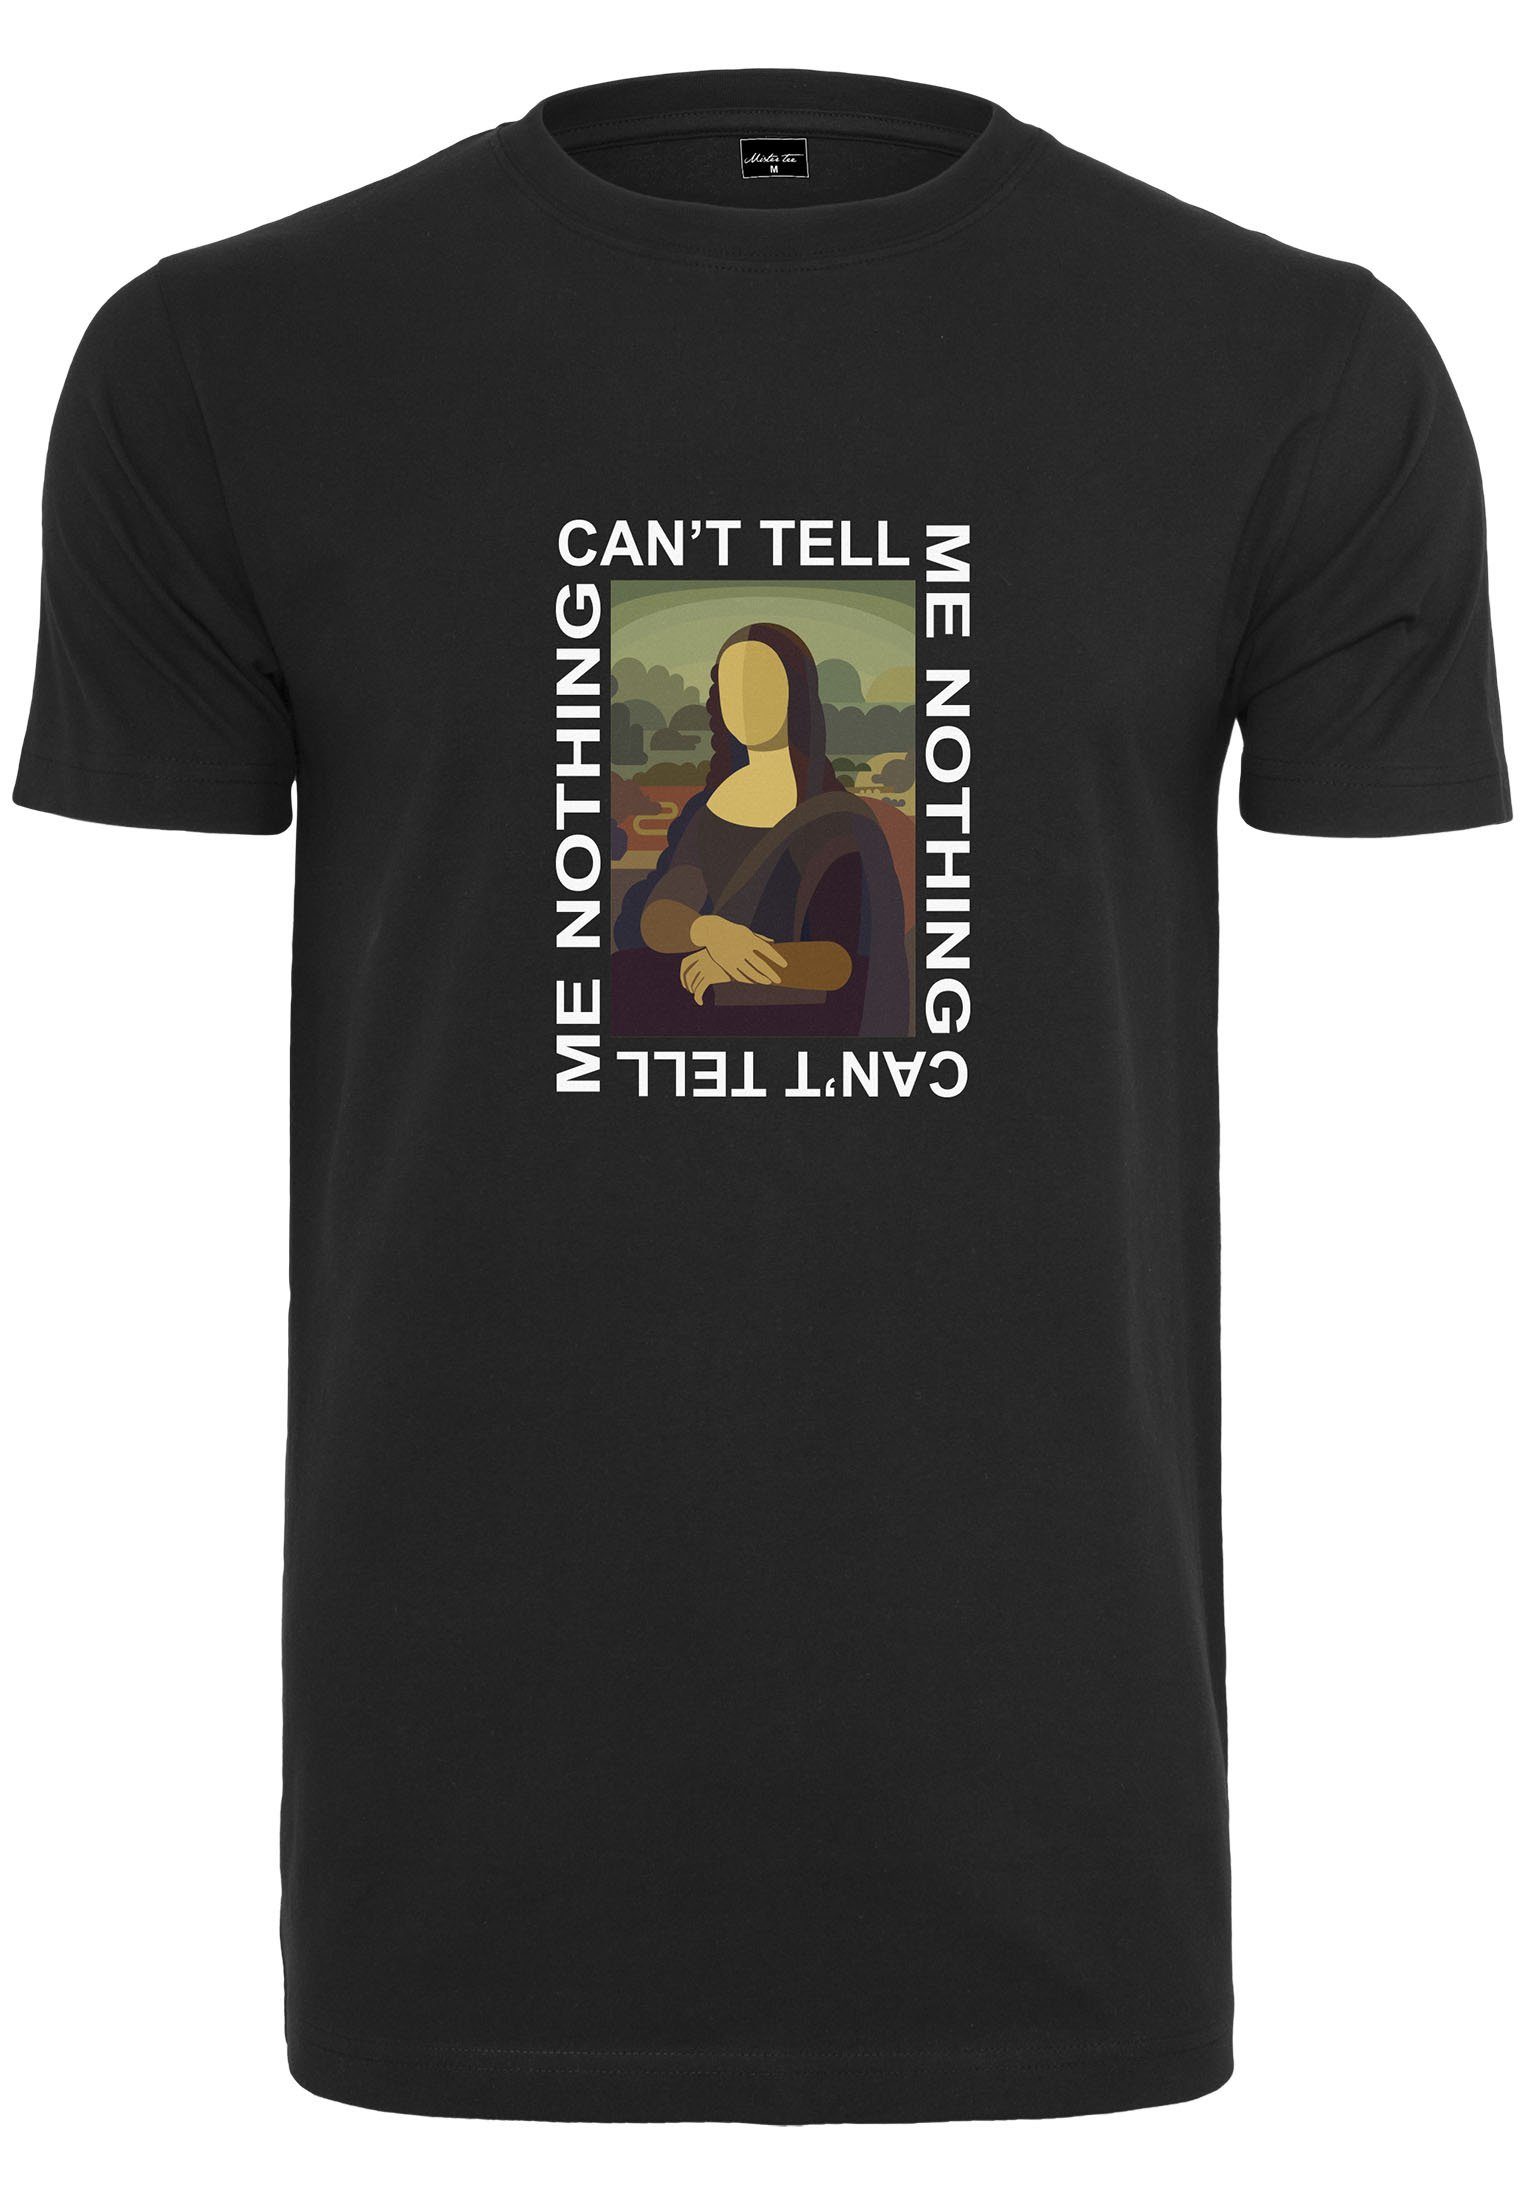 (1-tlg) Can´t Tell Tee Me Herren Me black Tell Nothing MT1060 MisterTee T-Shirt Cant Nothing